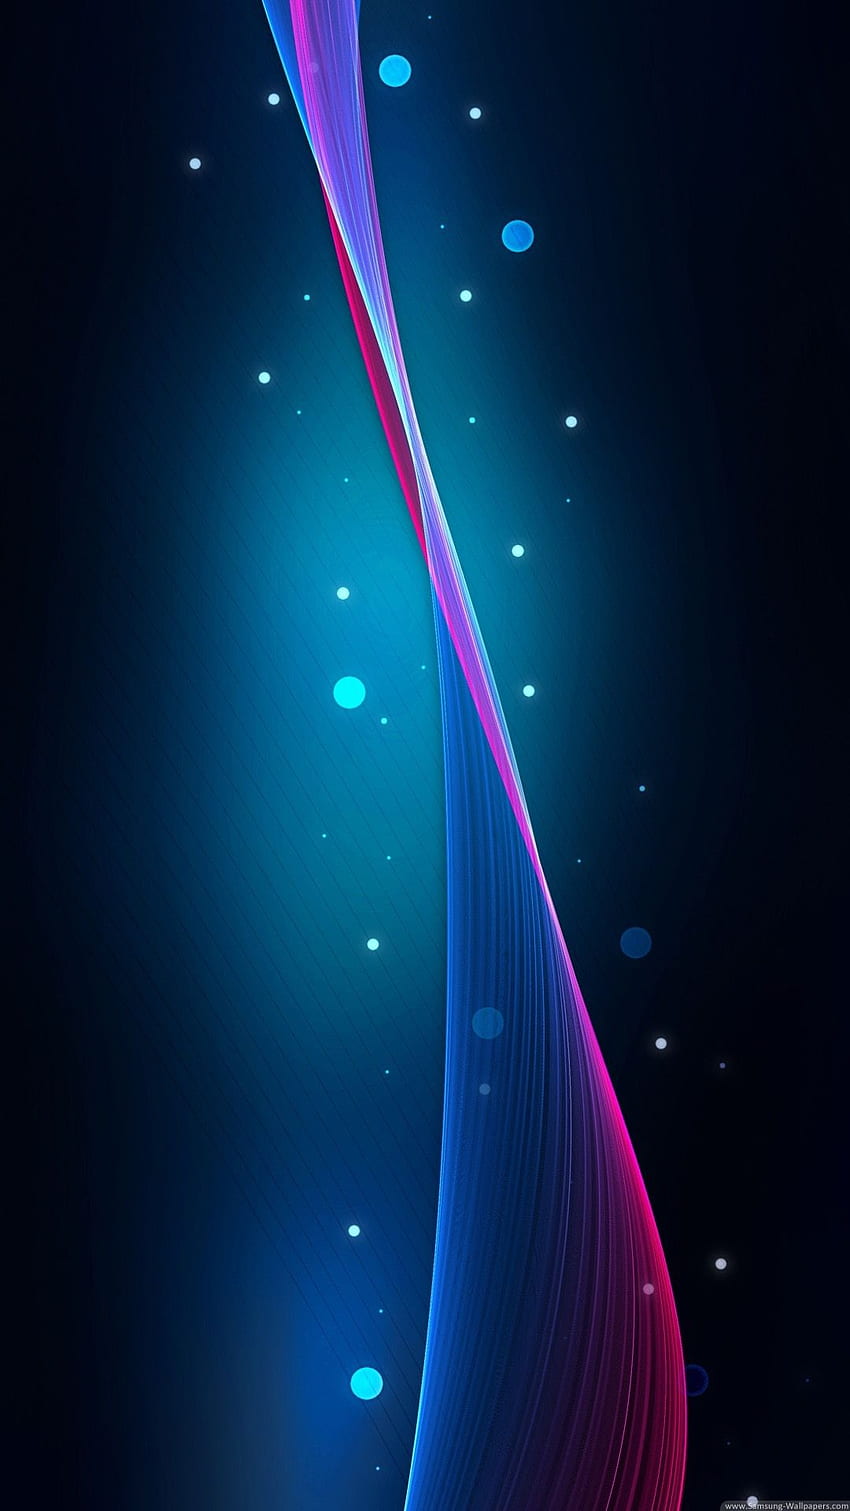 samsung mobile wallpapers and themes free downloads